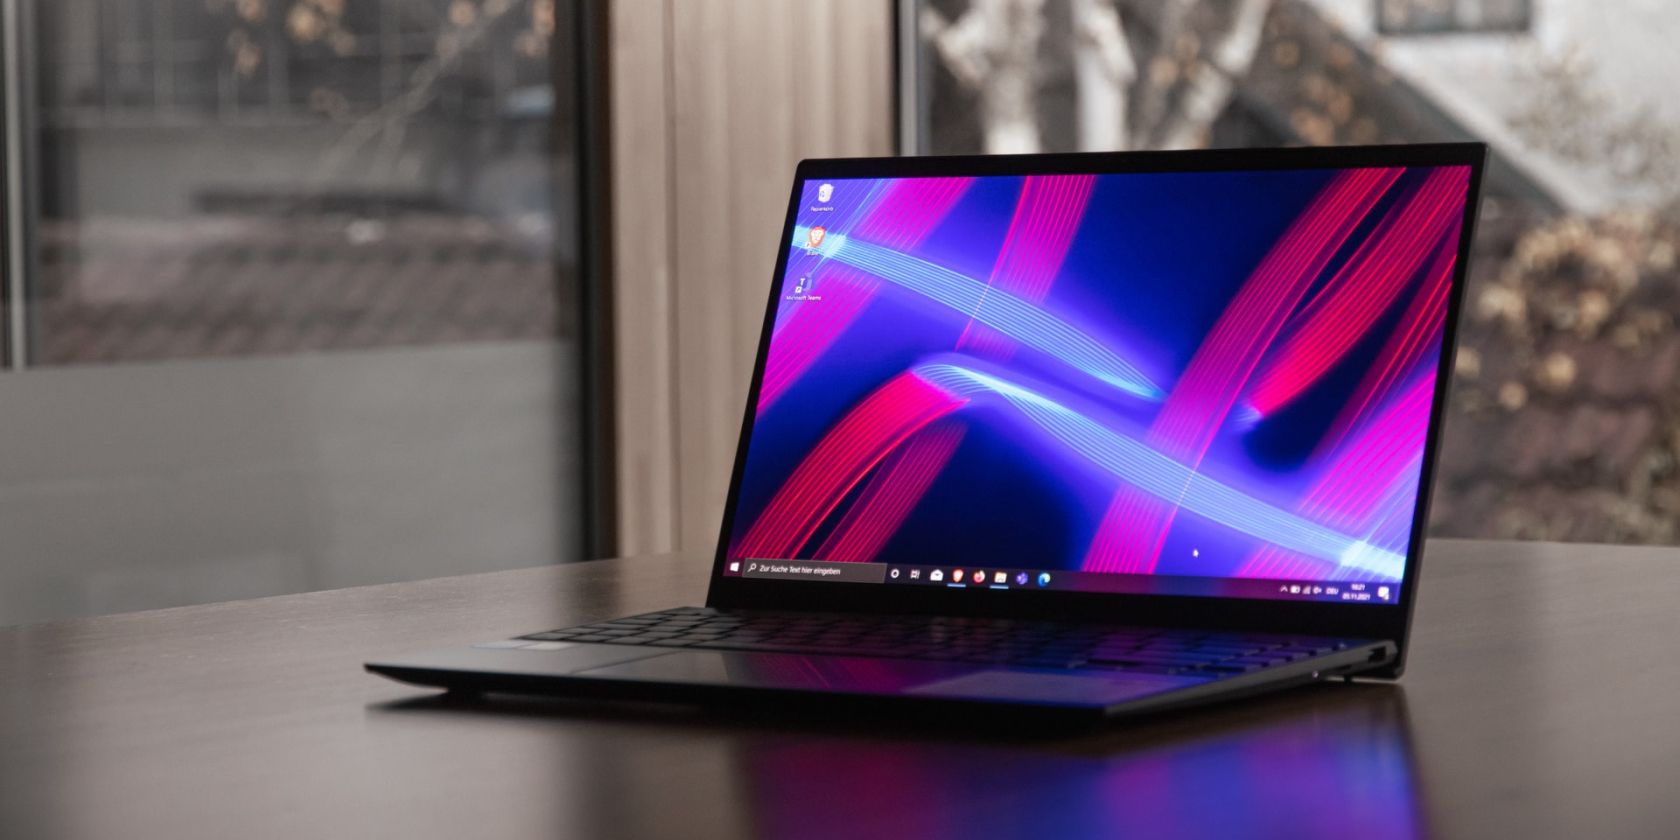 Windows 10 laptop is placed on the table